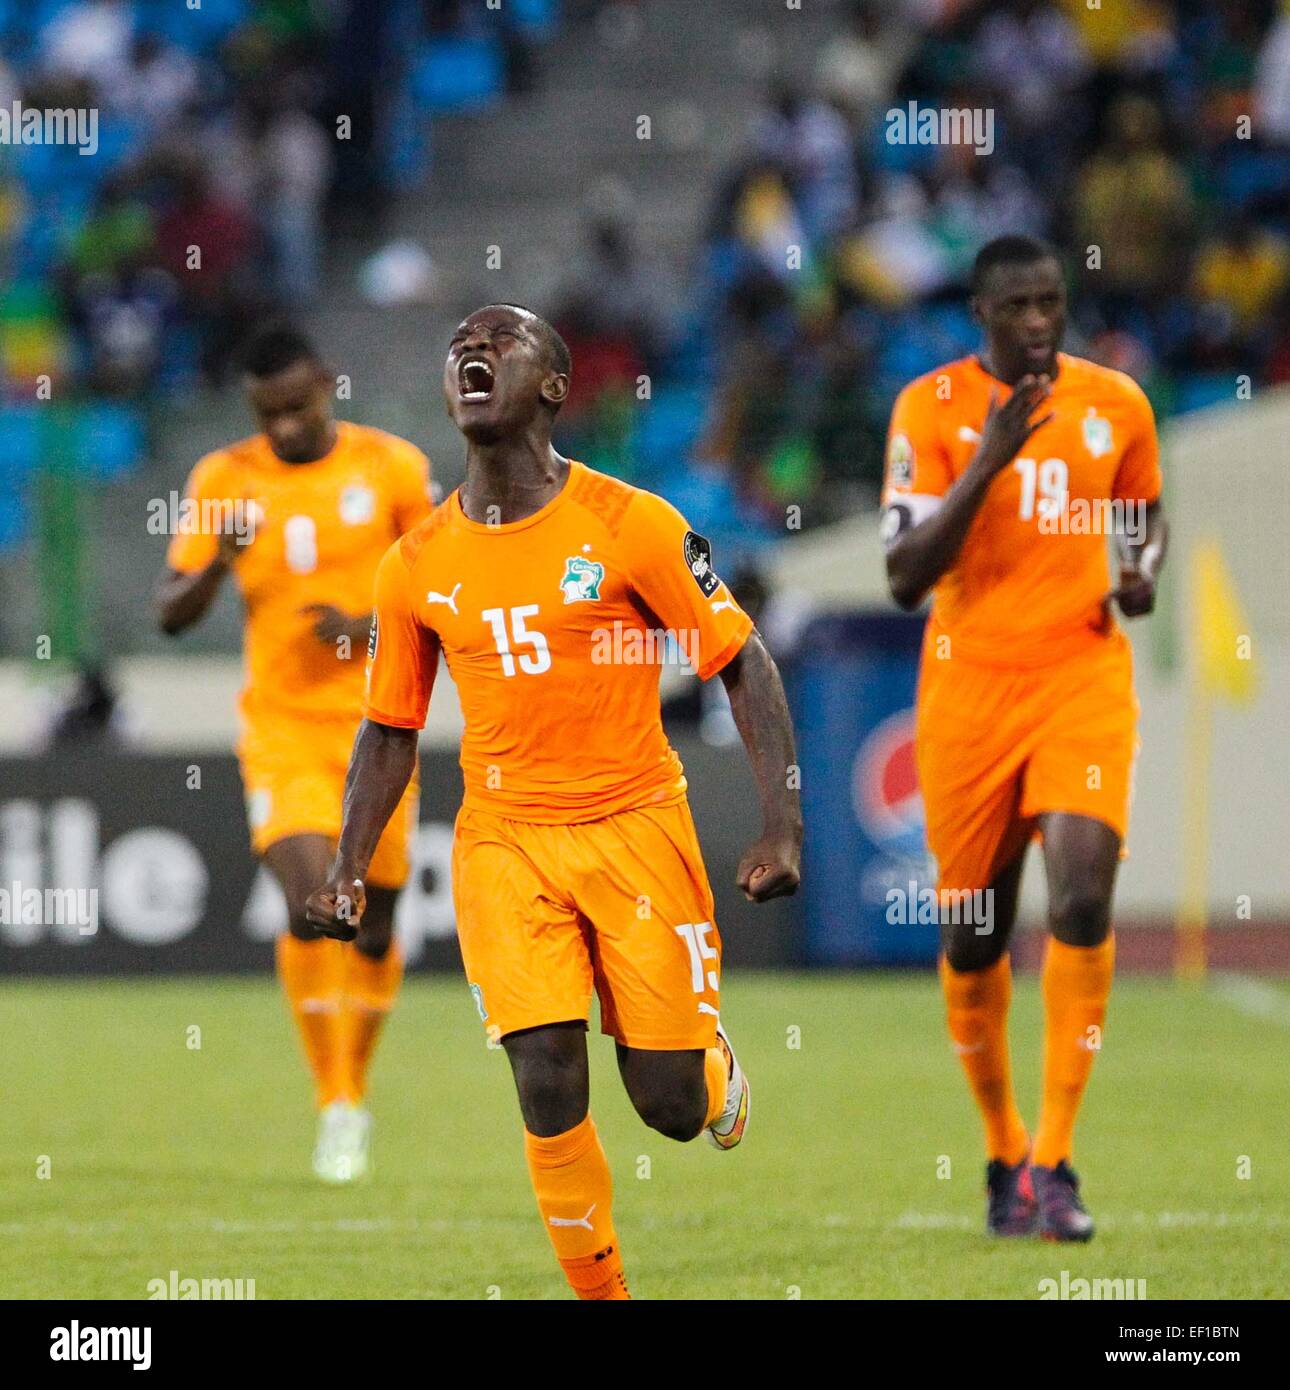 Malabo, Equatorial Guinea. 24th Jan, 2015. Max Alain Gradel (Front) of Cote d'Ivoire celebrates his goal during the group match of Africa Cup of Nations against Mali in Malabo, Equatorial Guinea, Jan. 24, 2015. The match ended with a 1-1 draw. © Li Jing/Xinhua/Alamy Live News Stock Photo